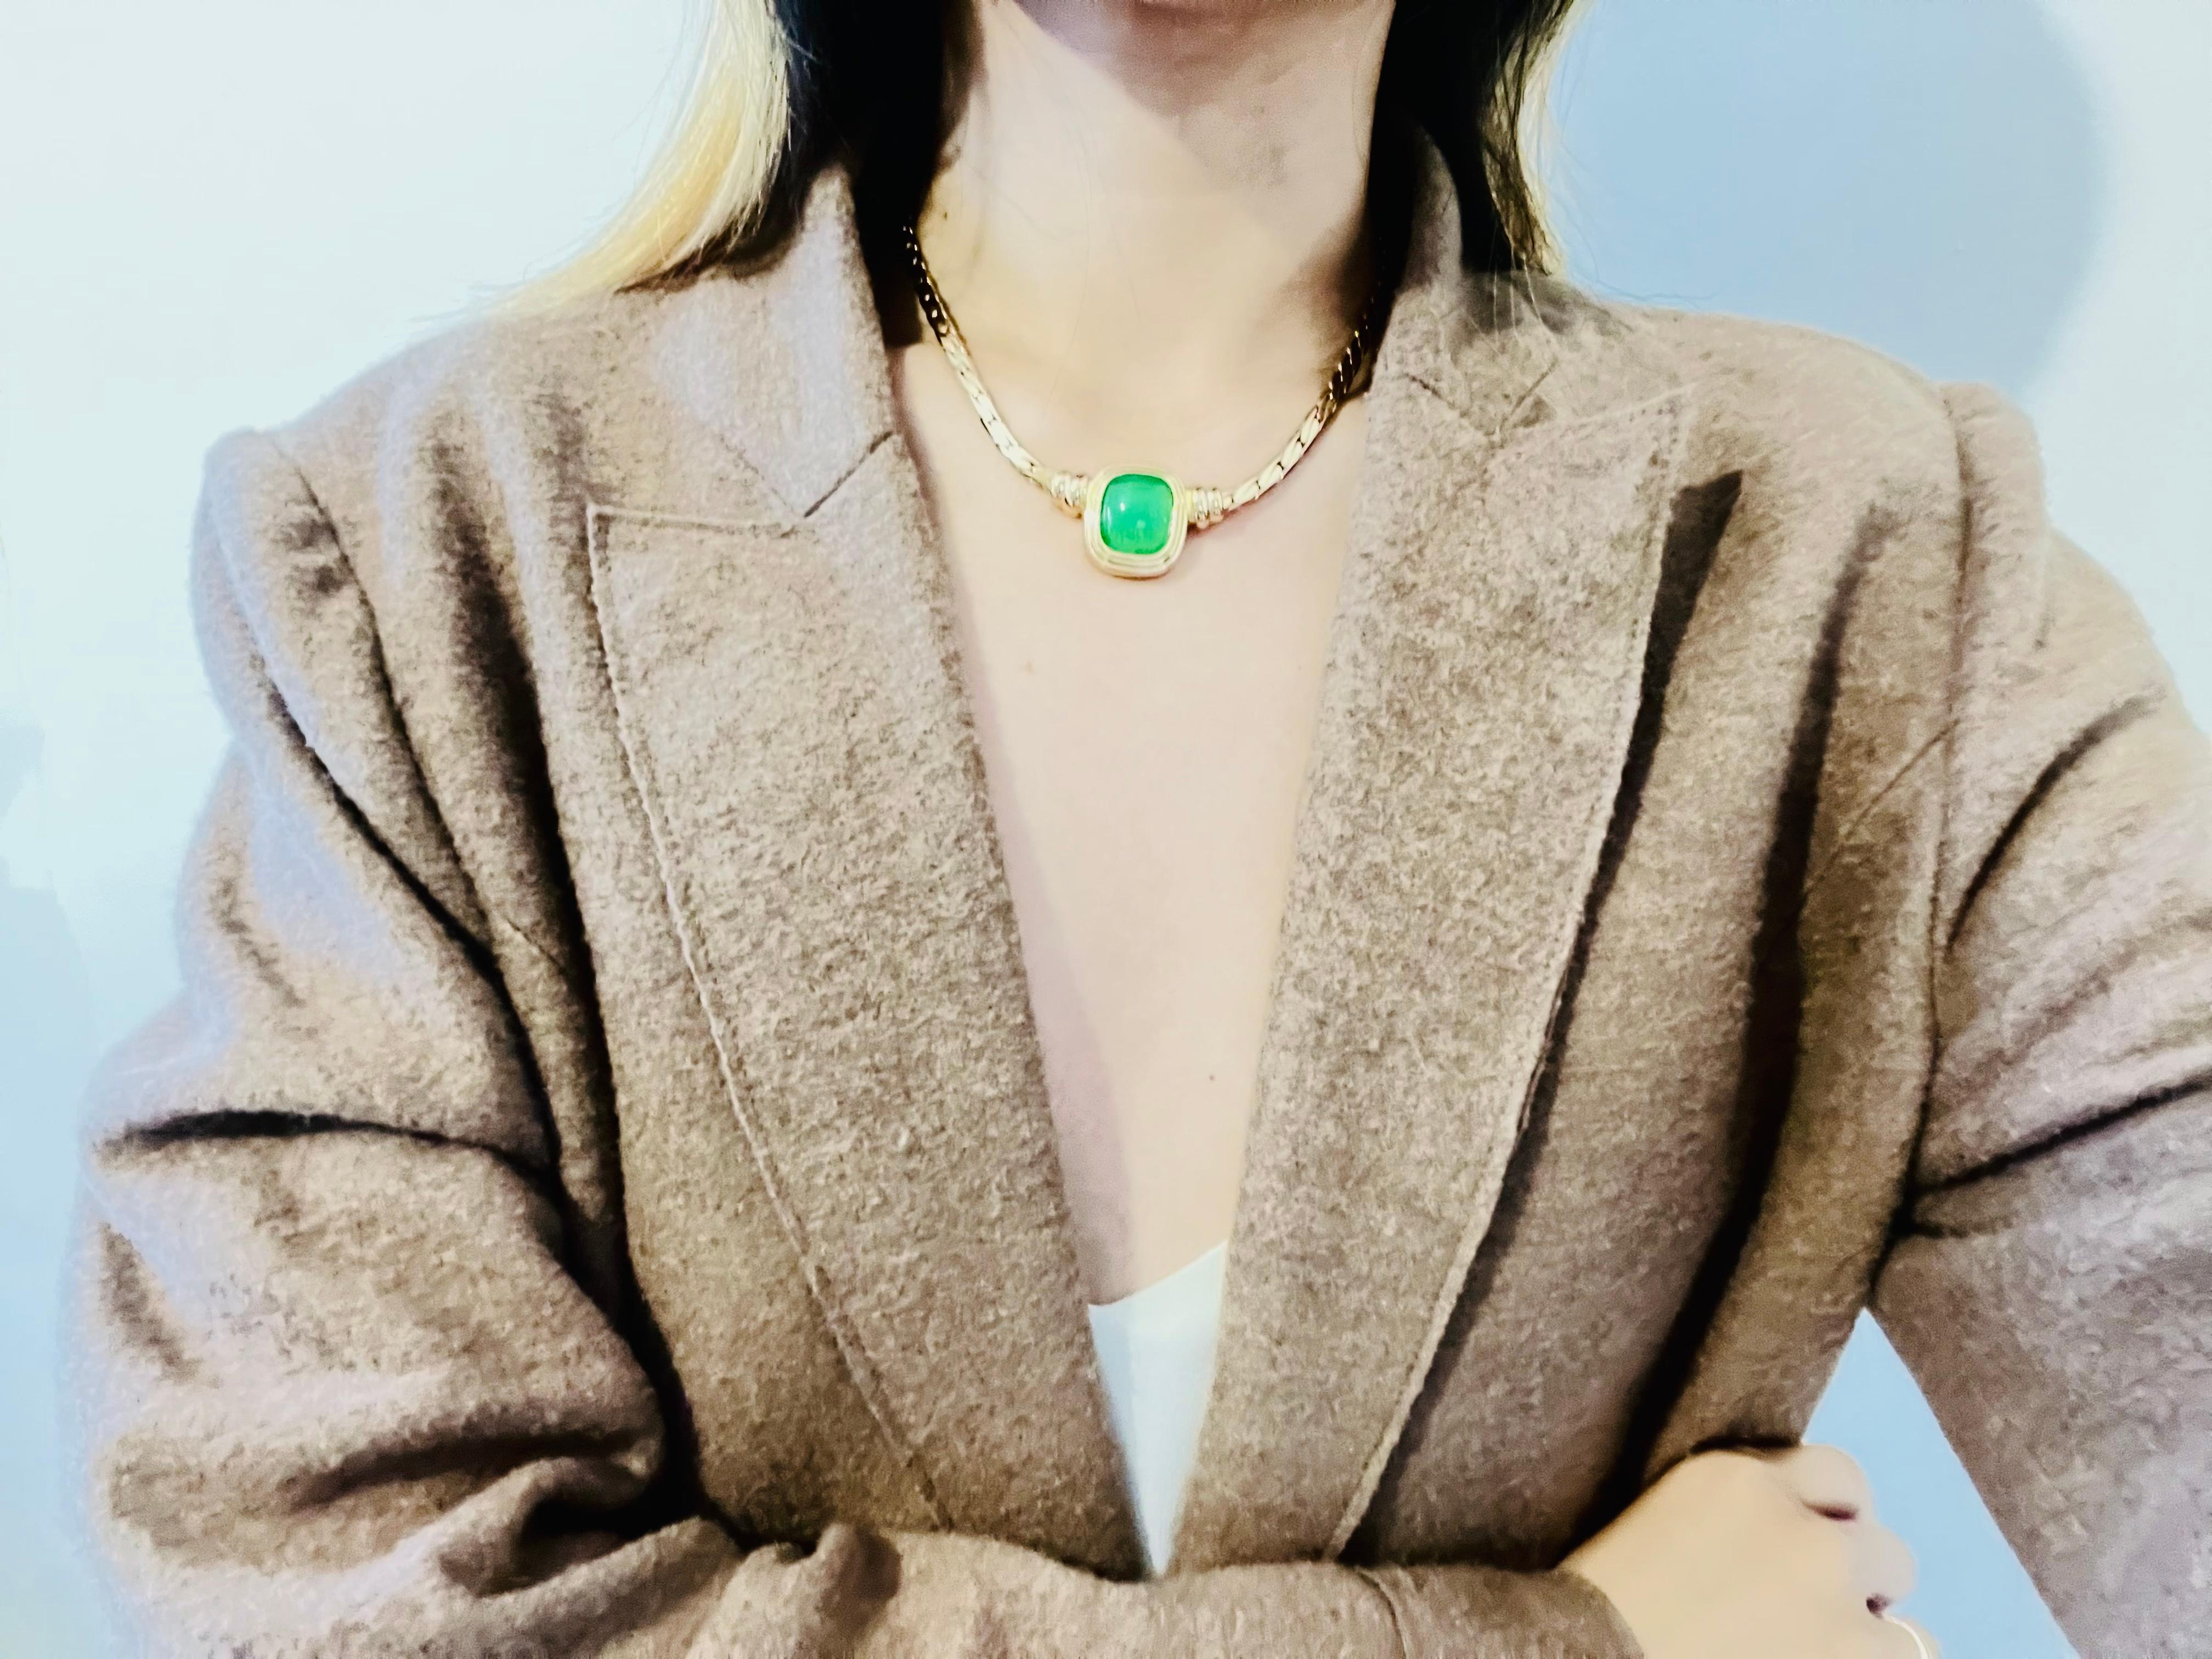 Christian Dior Vintage 1980s Emerald Green Rectangle Cabochon Pendant Necklace In Excellent Condition For Sale In Wokingham, England